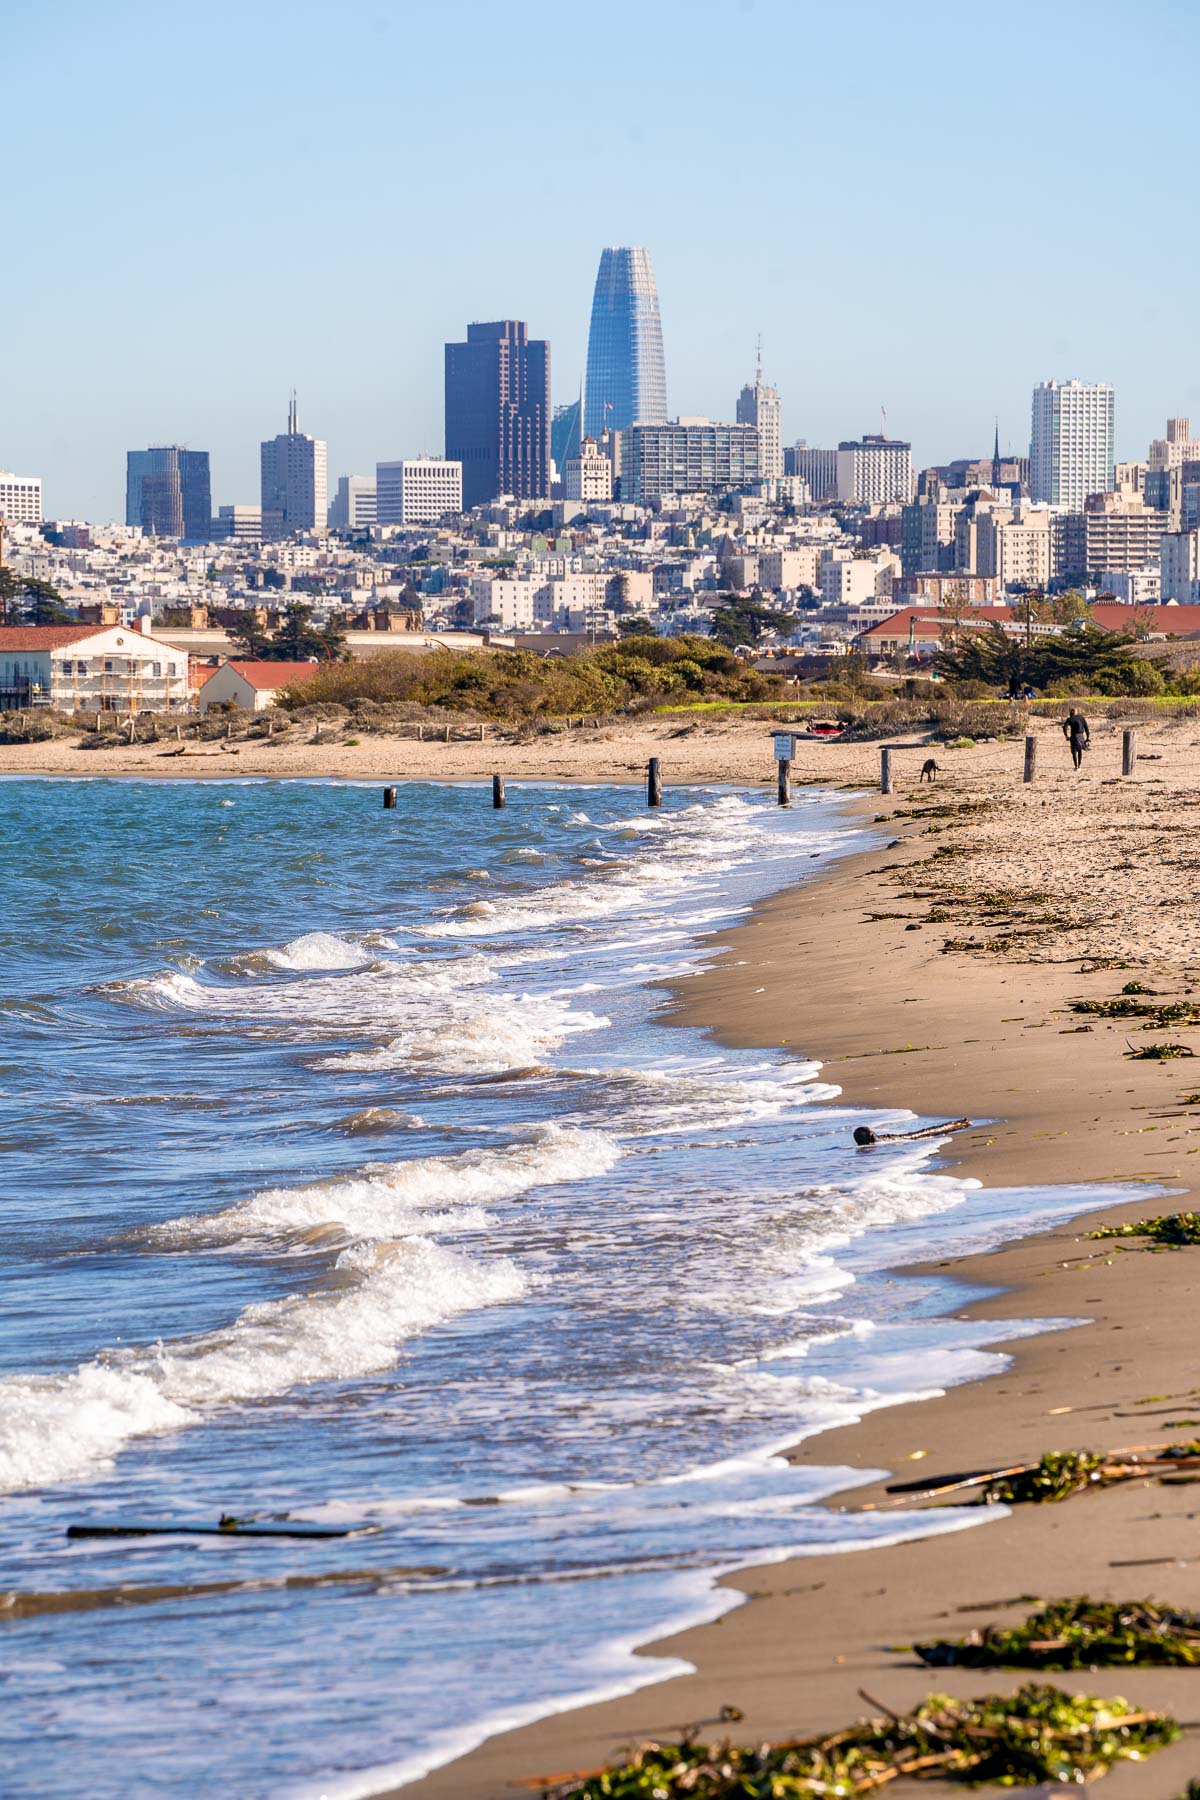 Downtown San Francisco from the beach